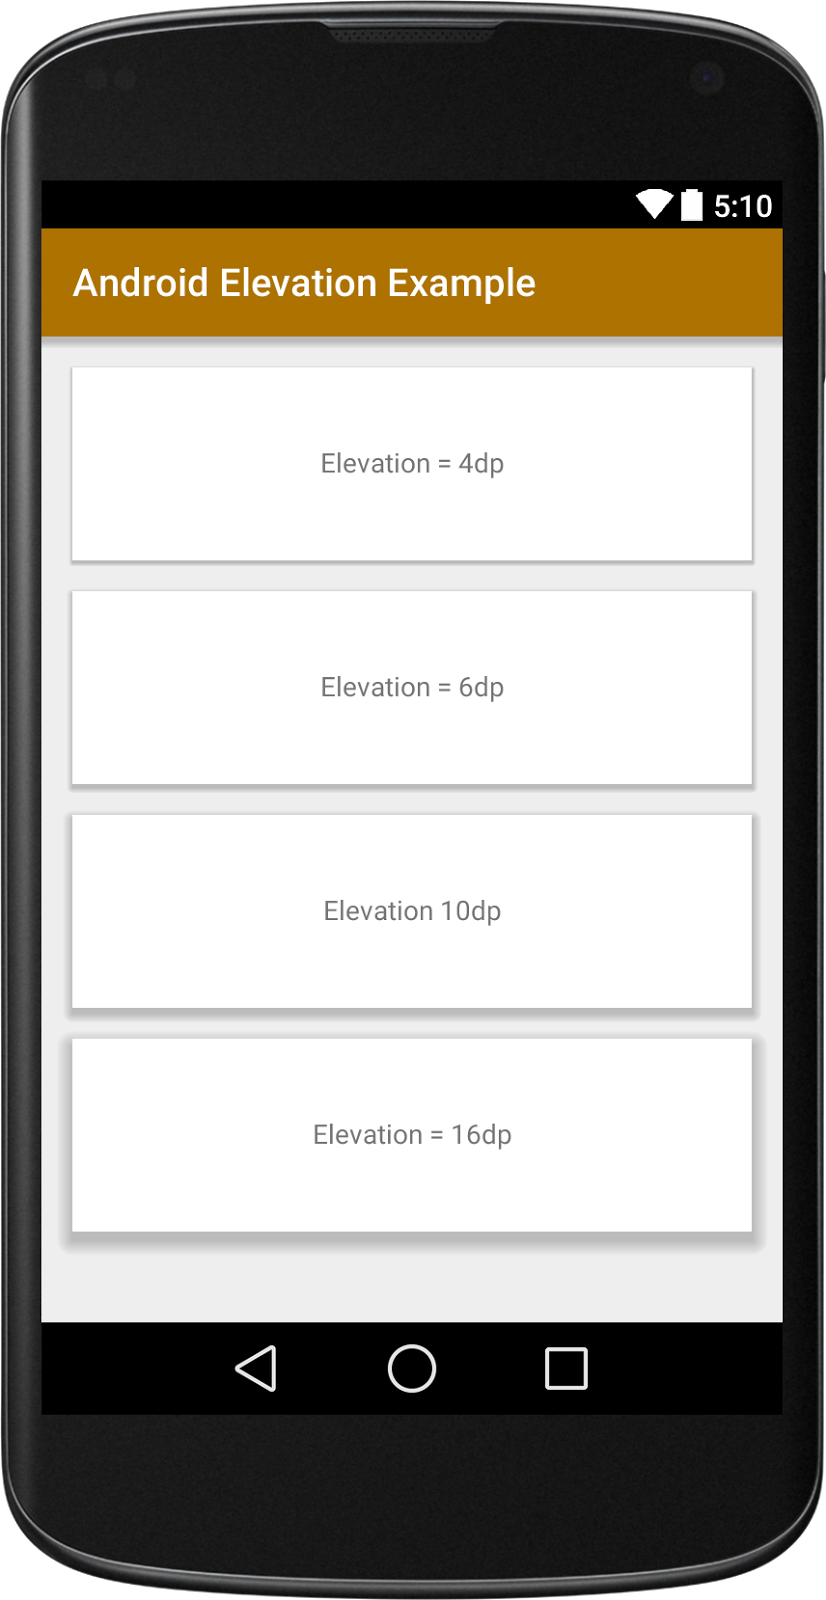 Android Elevation Example